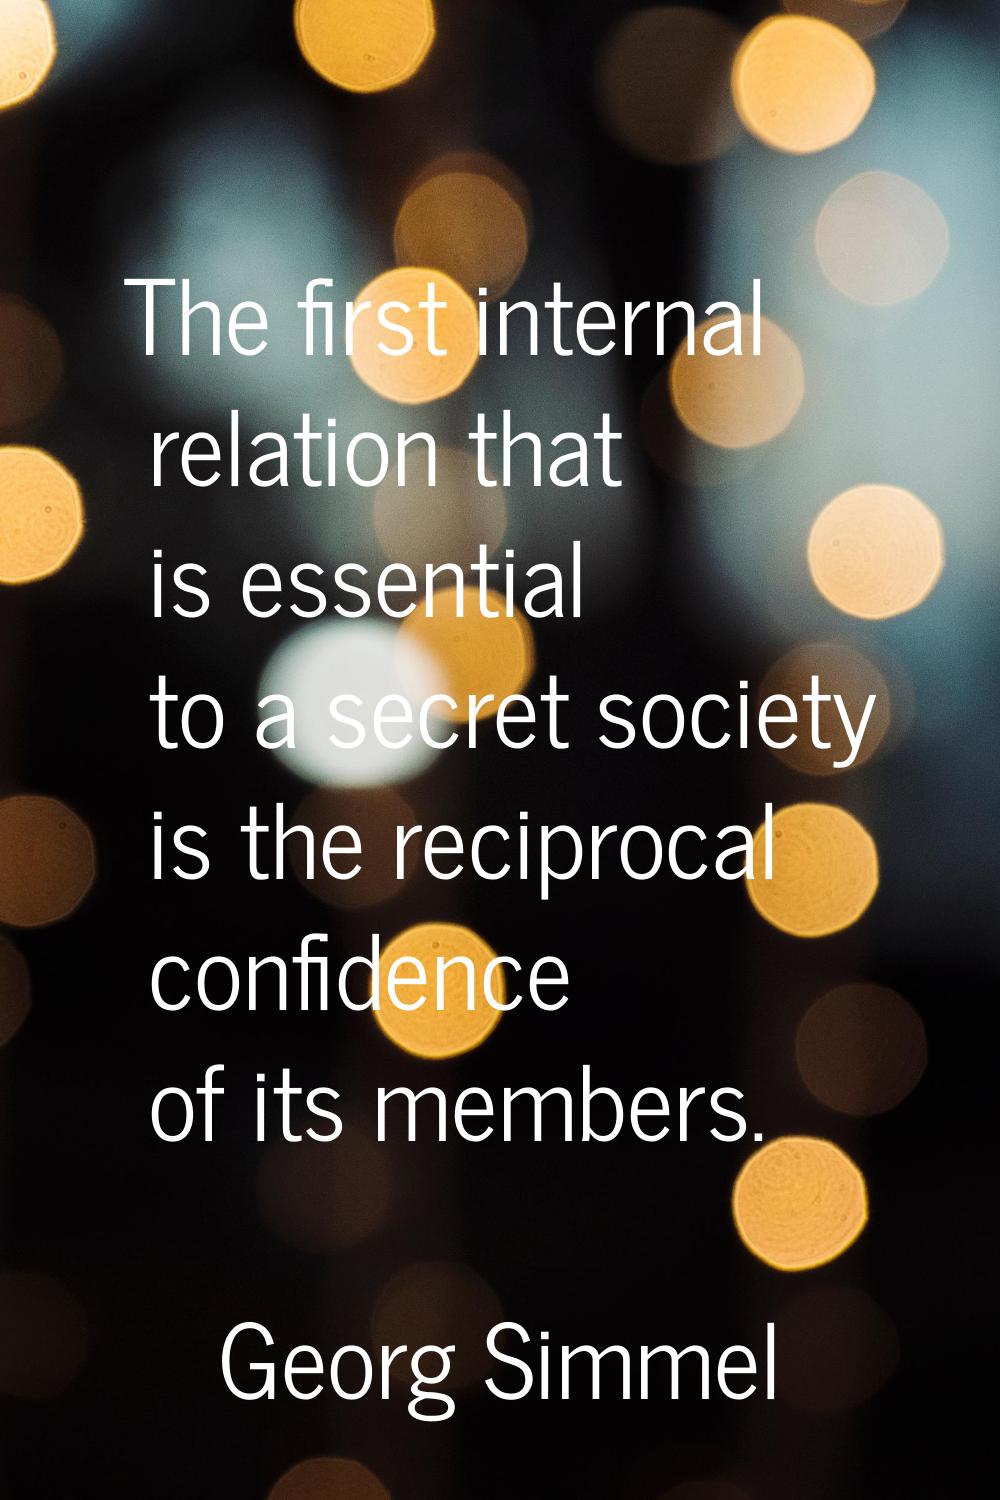 The first internal relation that is essential to a secret society is the reciprocal confidence of i